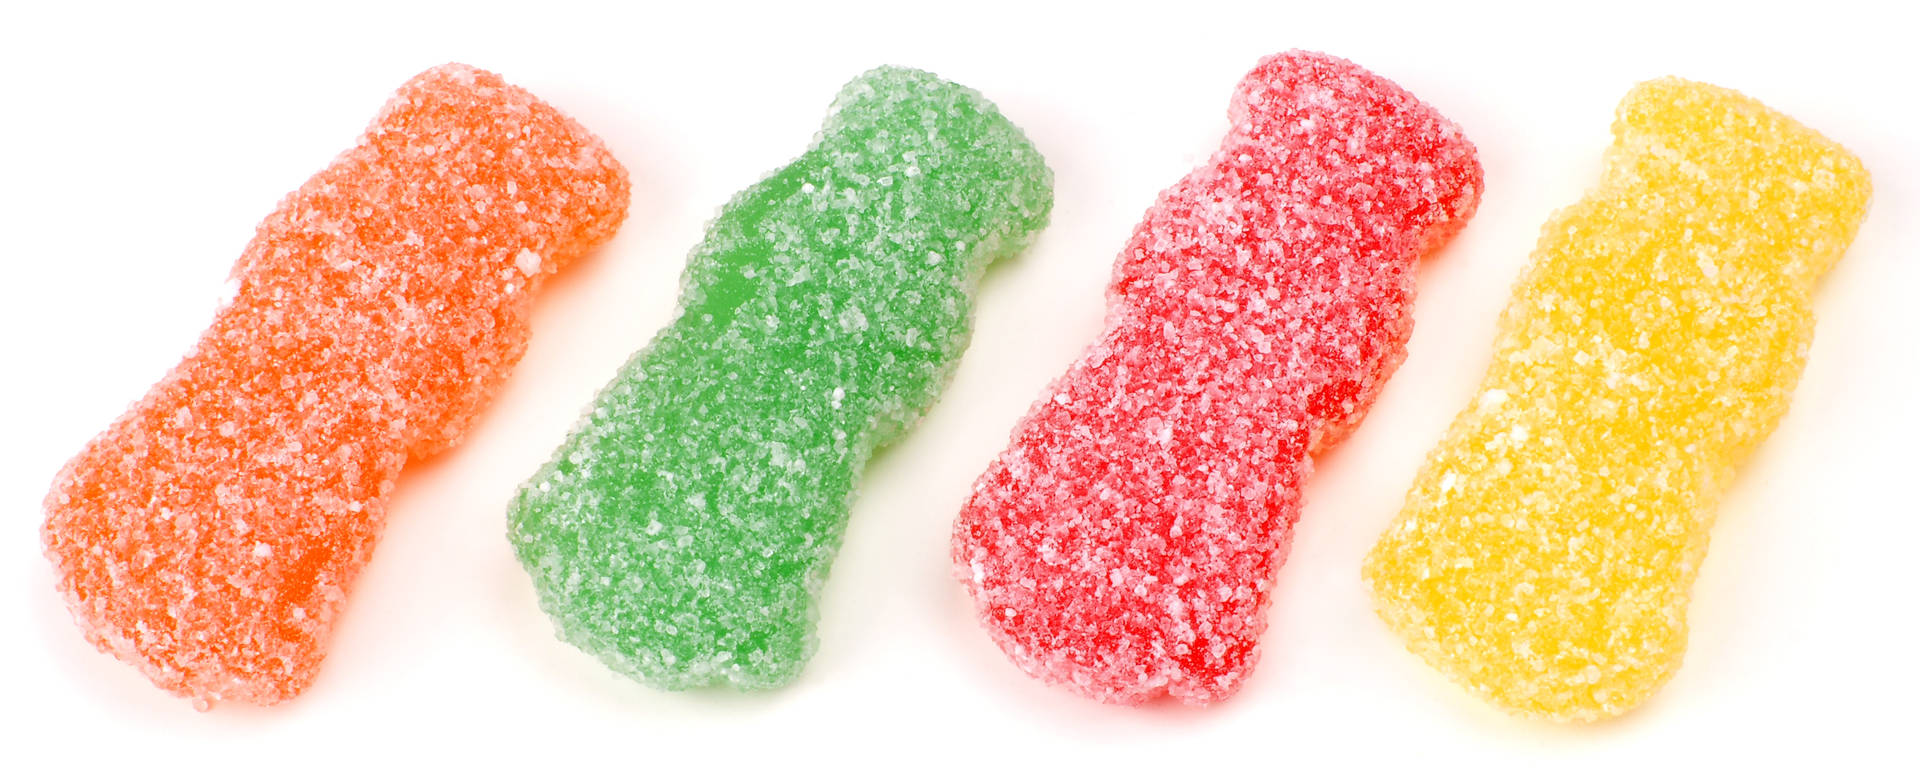 Vibrant And Delicious Sugar-Coated Gummy Candies Wallpaper